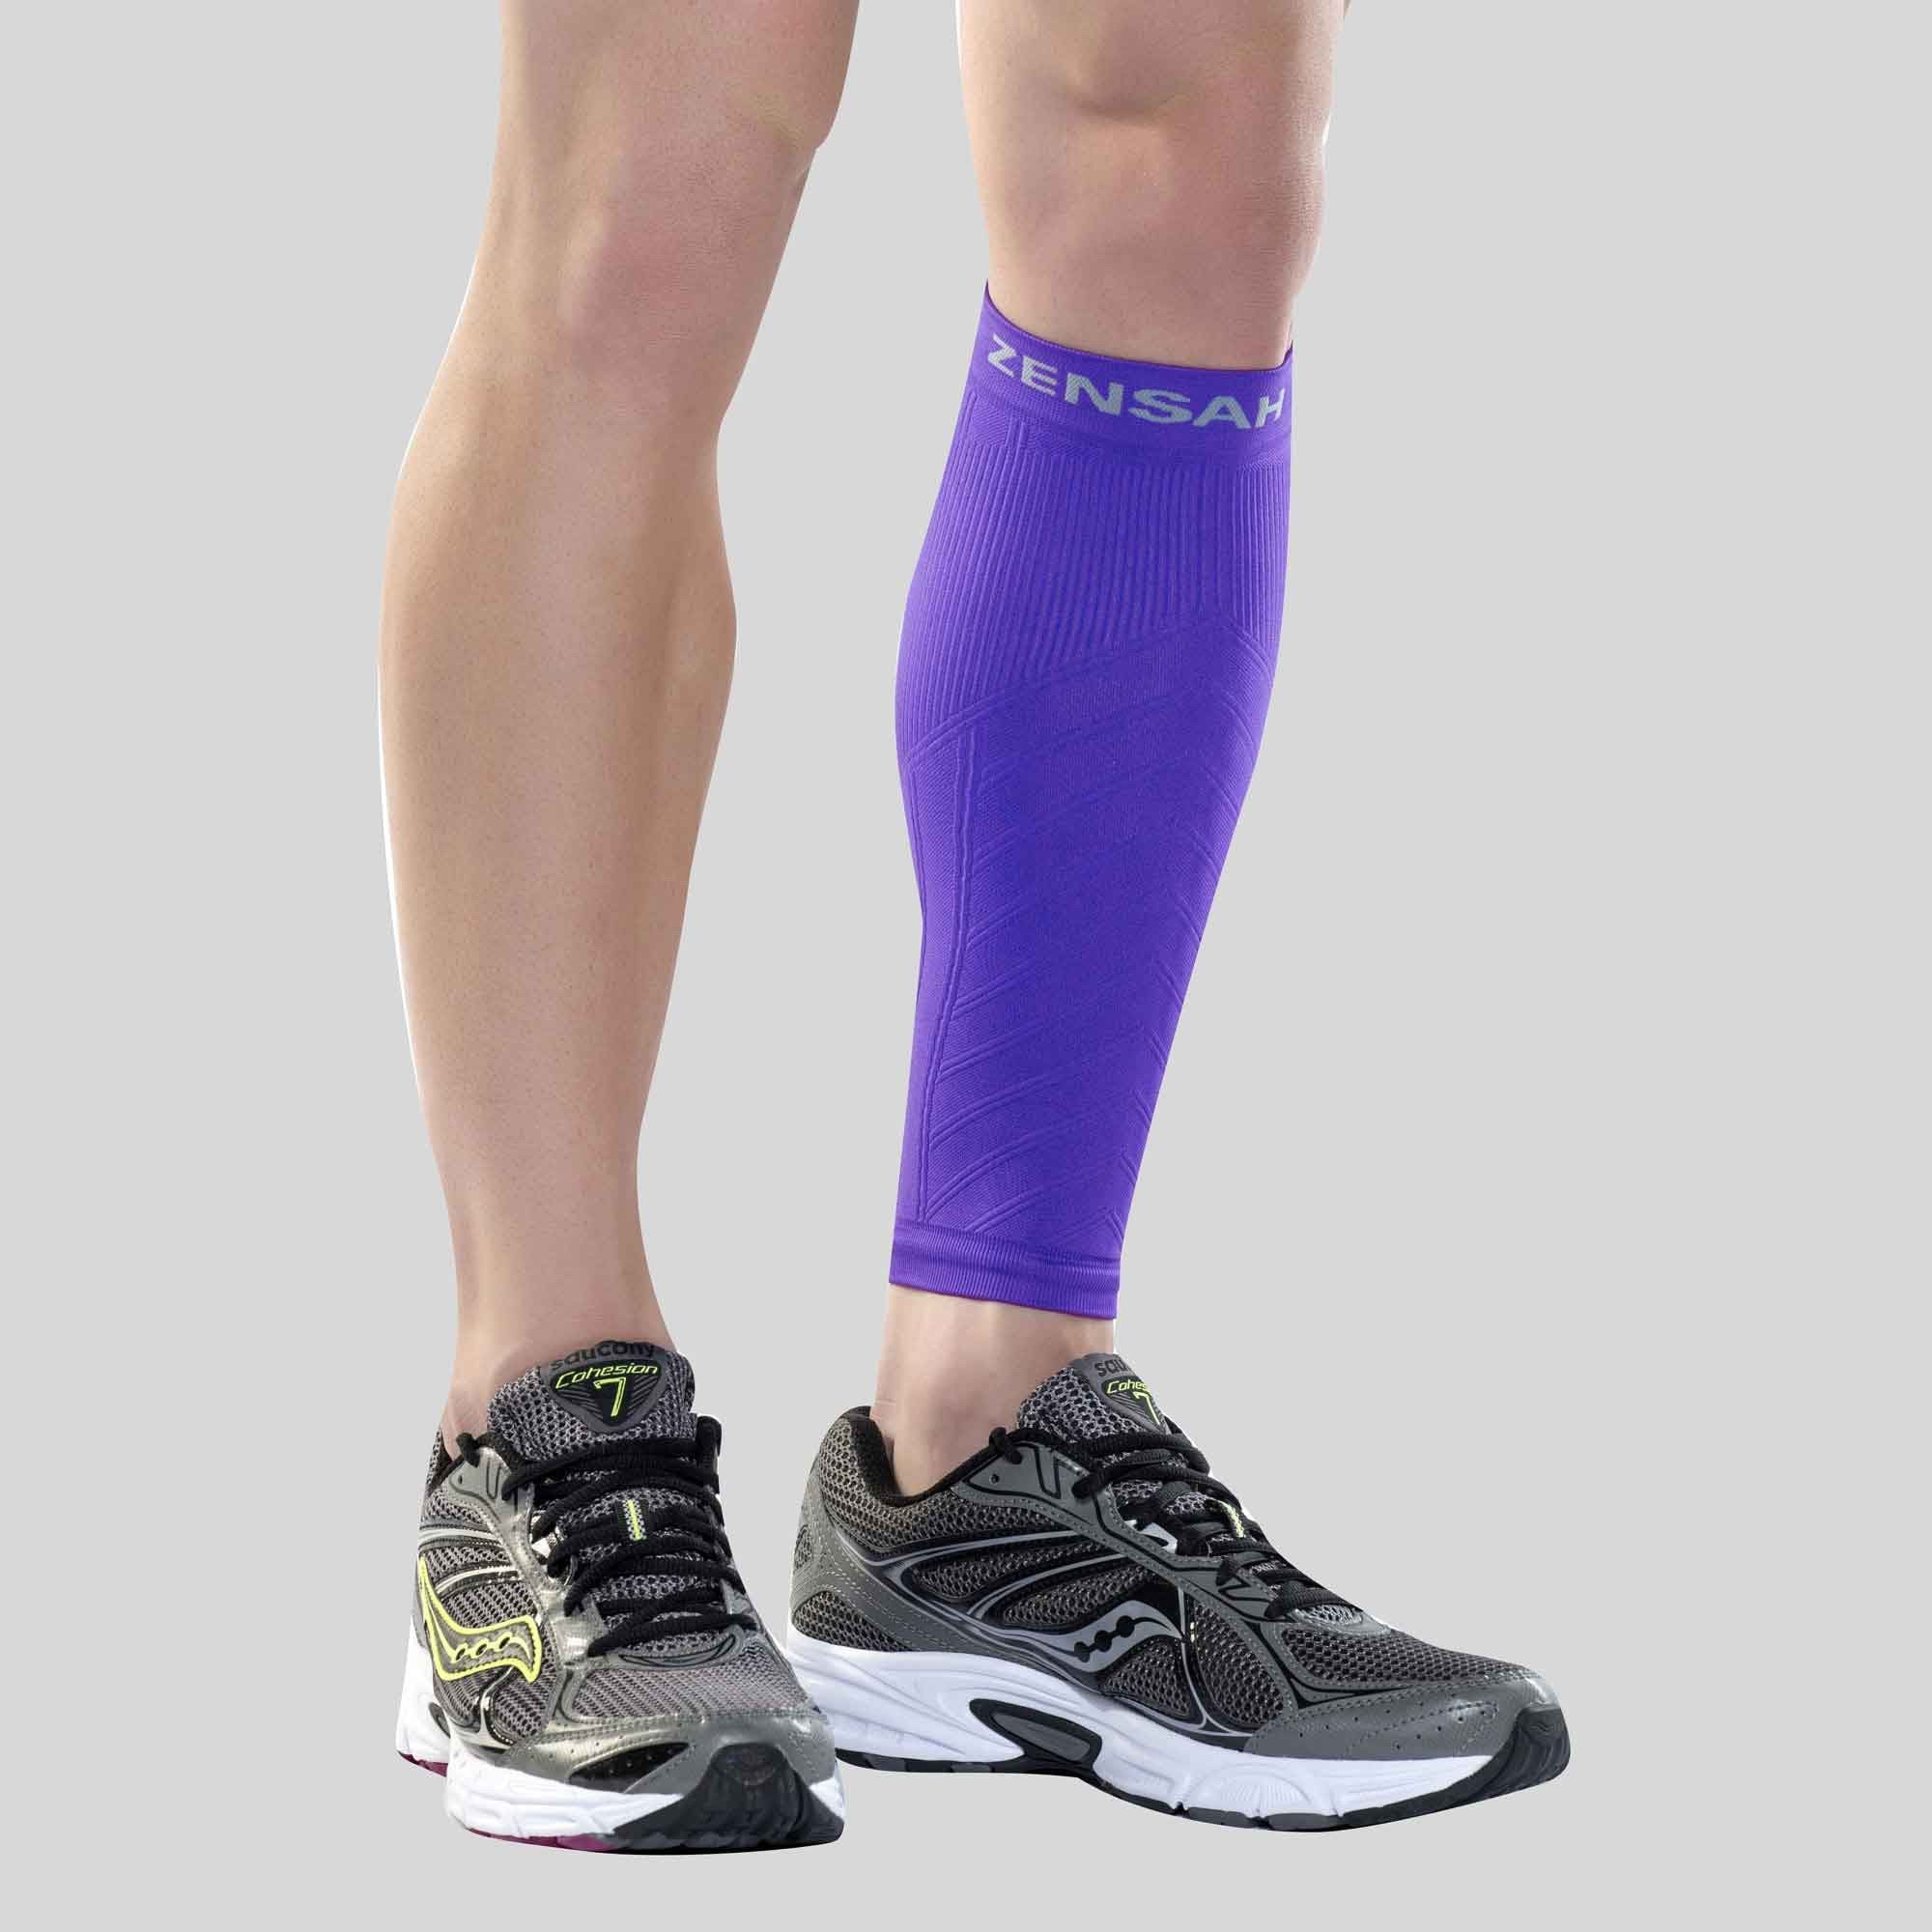 Zensah Running Leg Compression Sleeves - Shin Splint, Calf Compression  Sleeve Men and Women,  price tracker / tracking,  price  history charts,  price watches,  price drop alerts